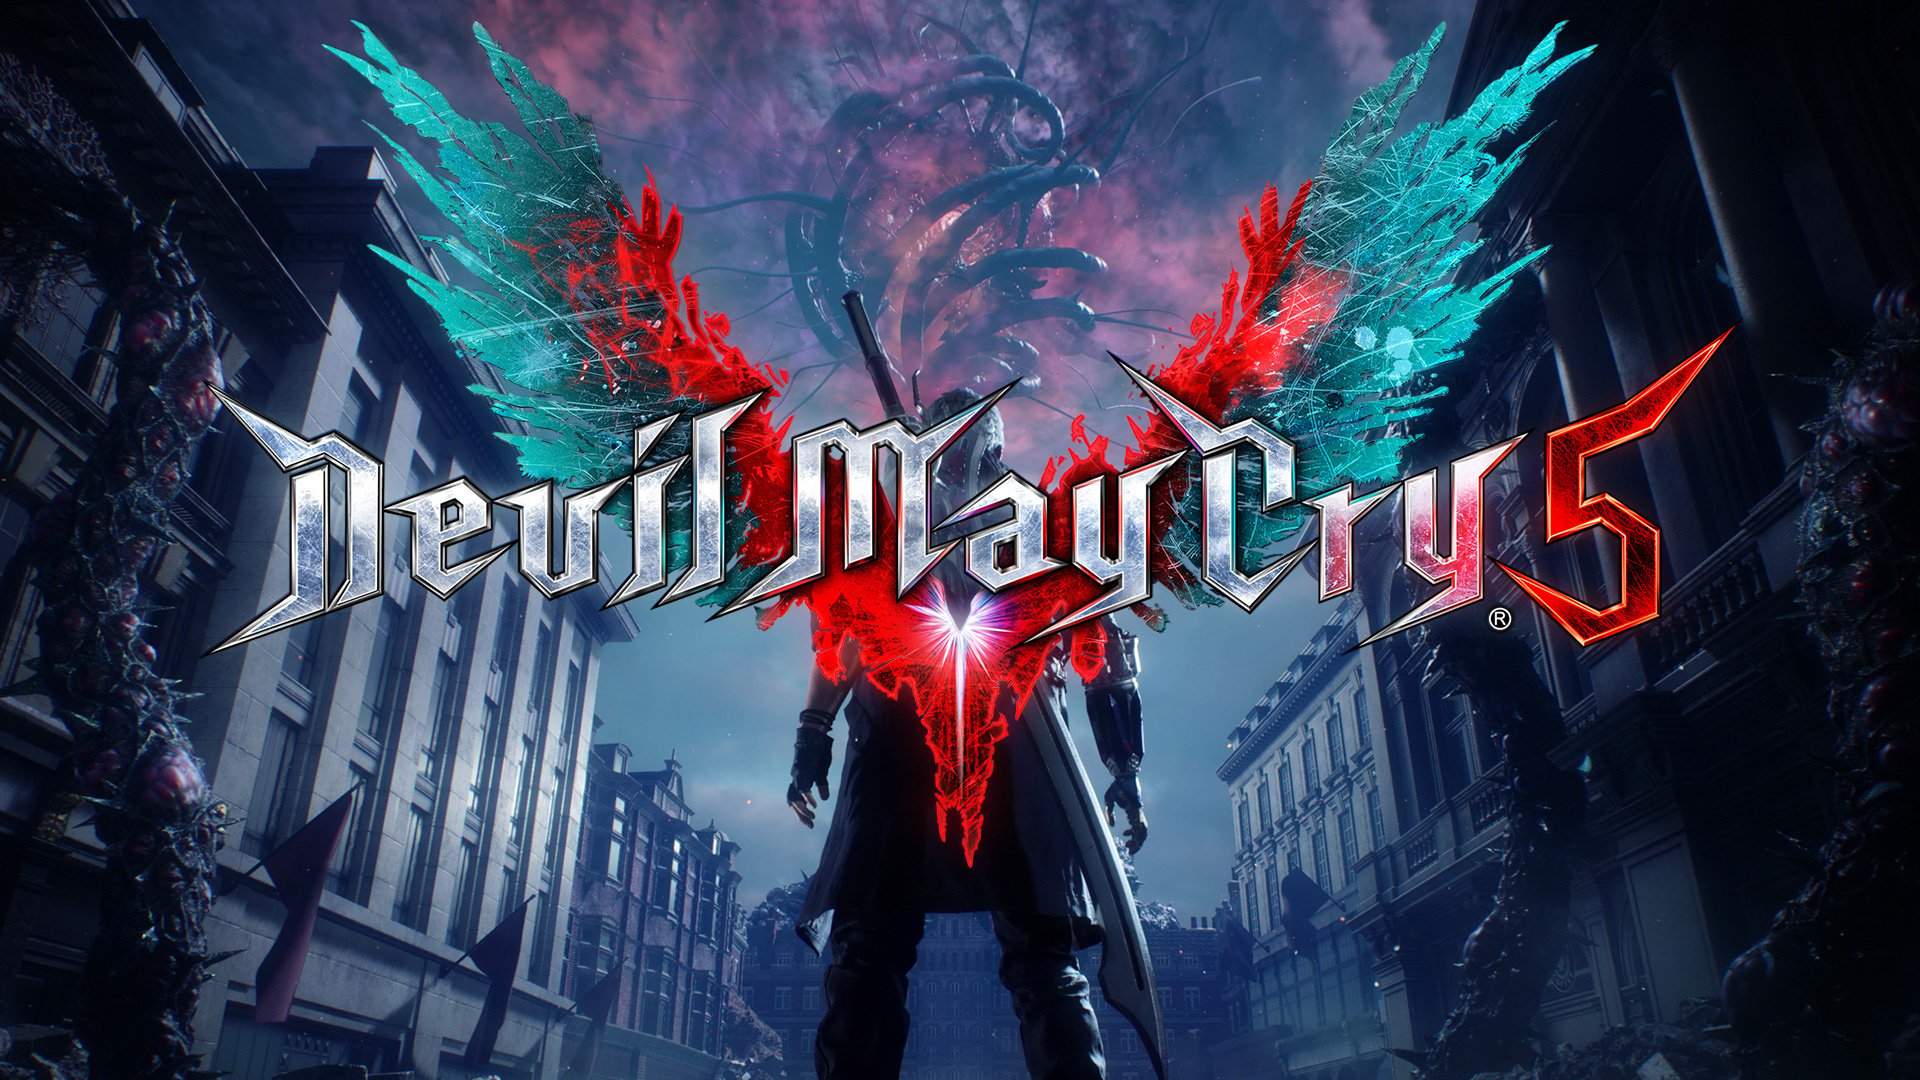 Is Devil May Cry 5 open world?